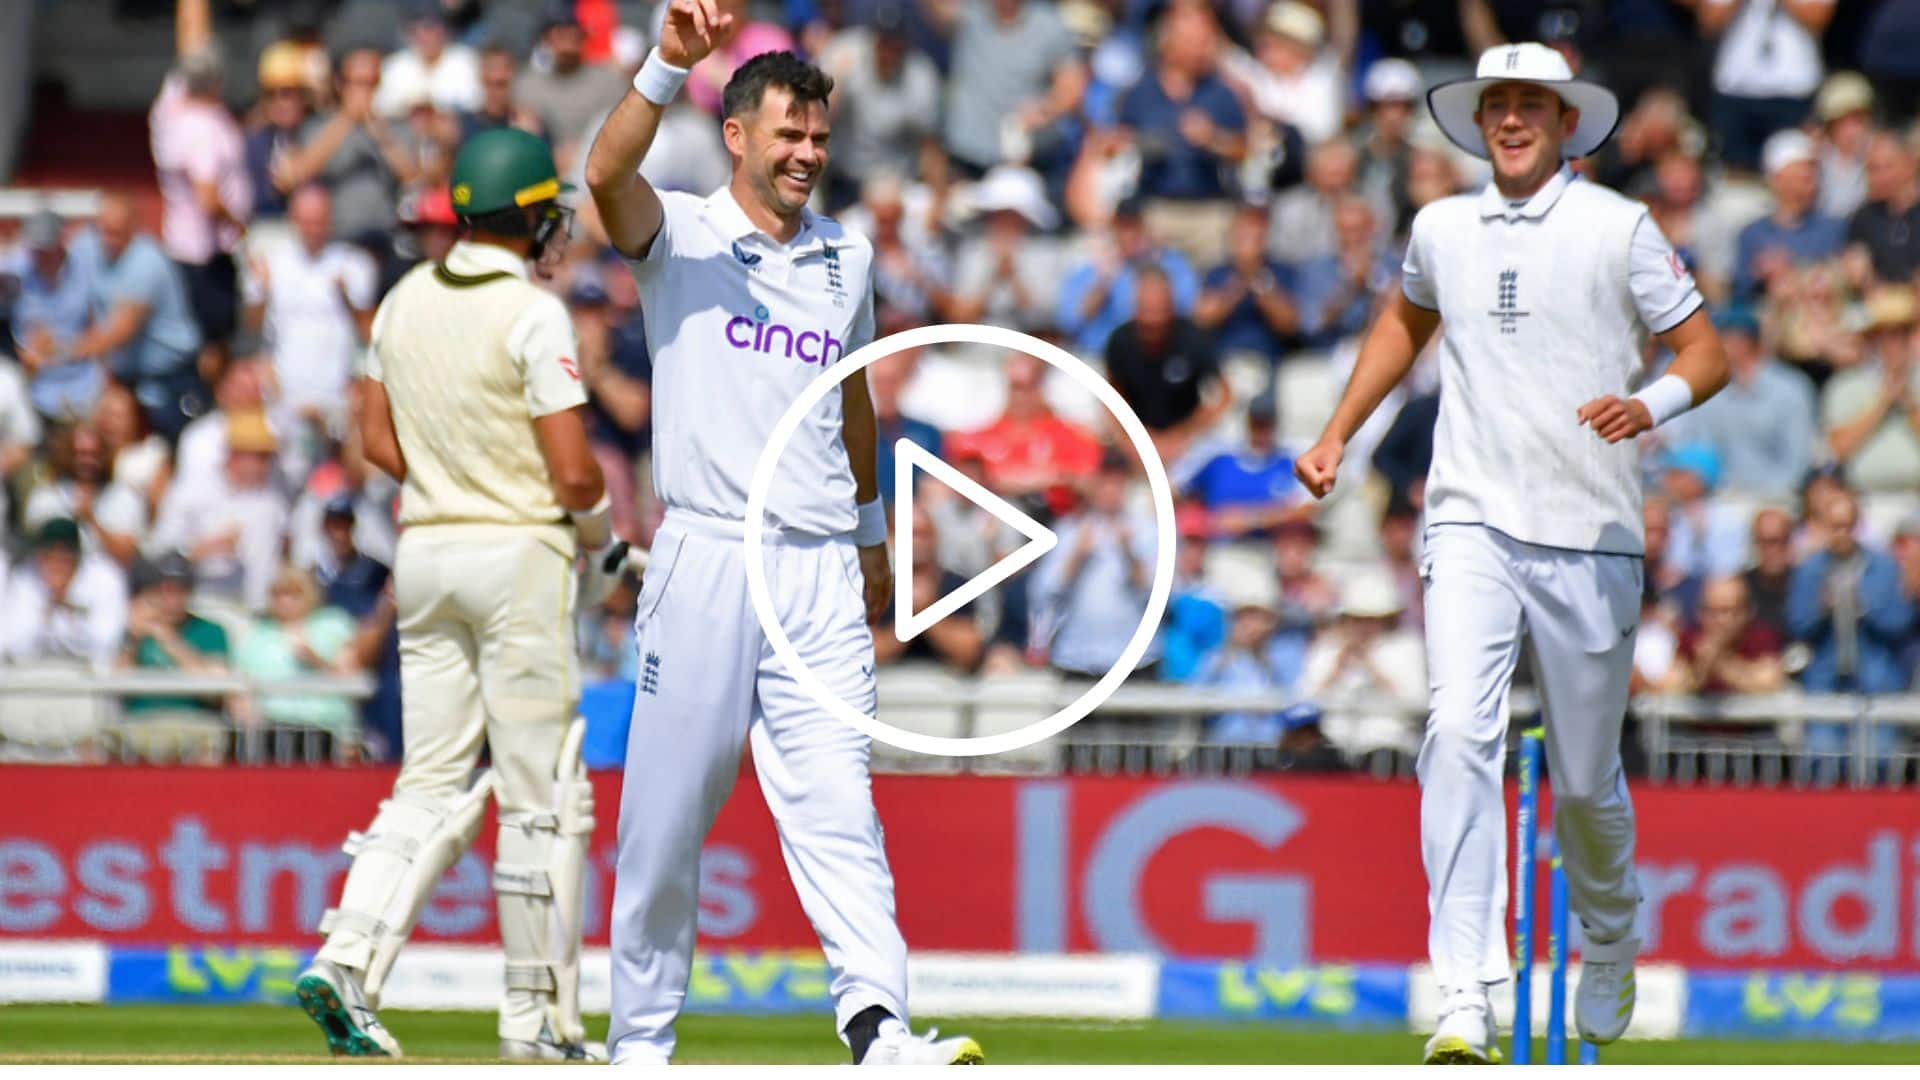 [Watch] James Anderson Stuns Australia With A Wicket On First Ball Of Day 2